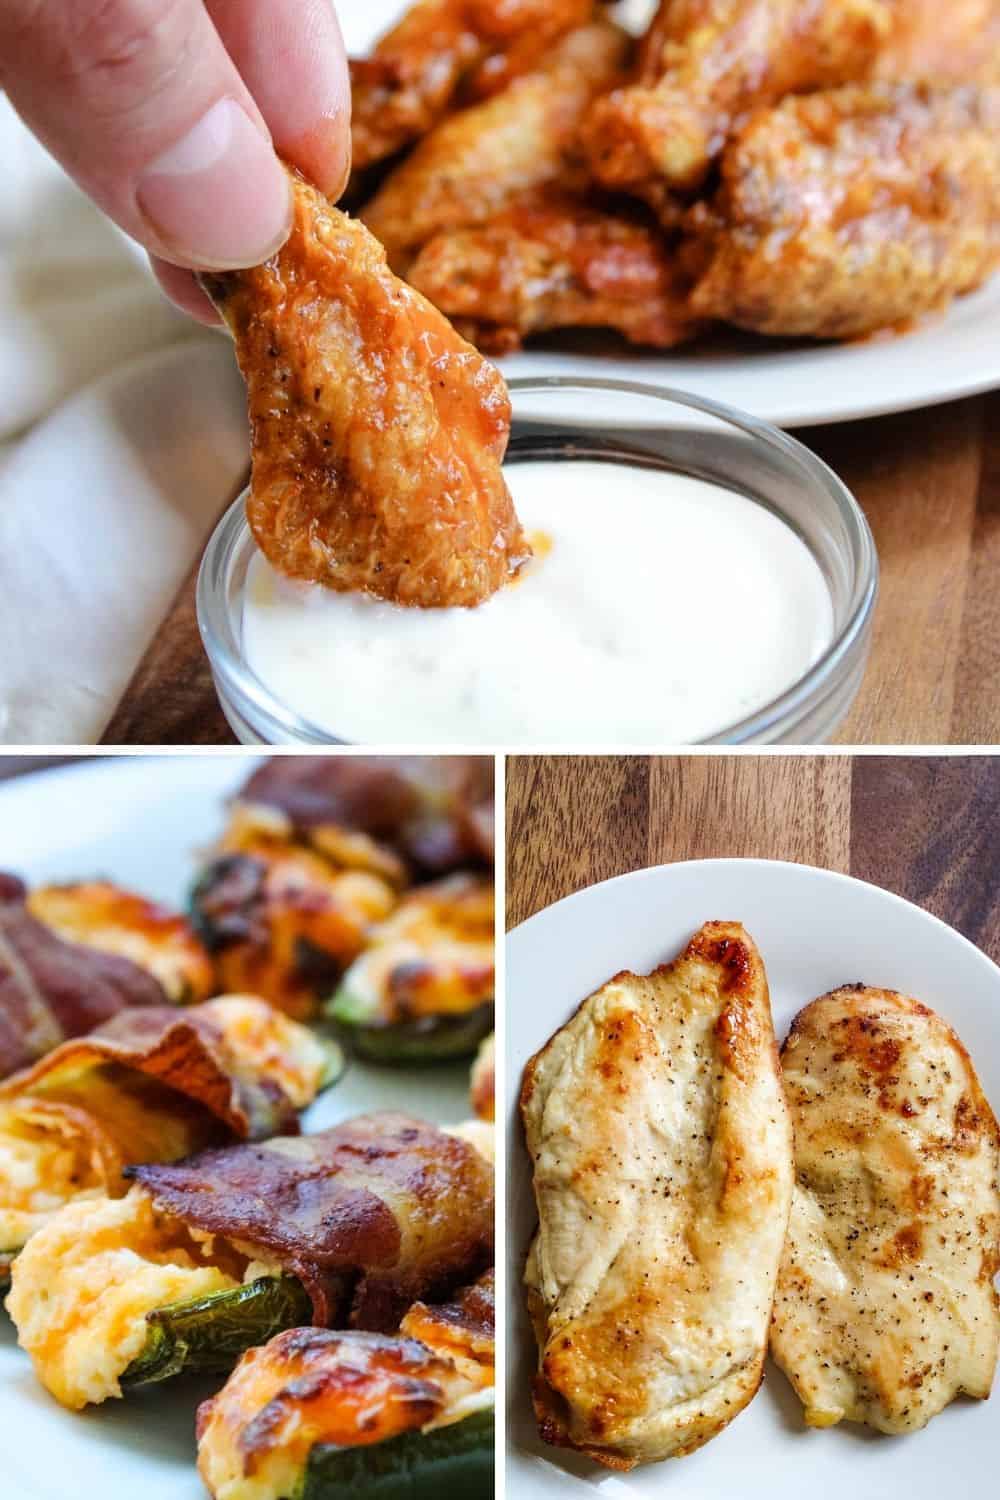 This Air Fryer Makes Keto Cooking 10 Times Better